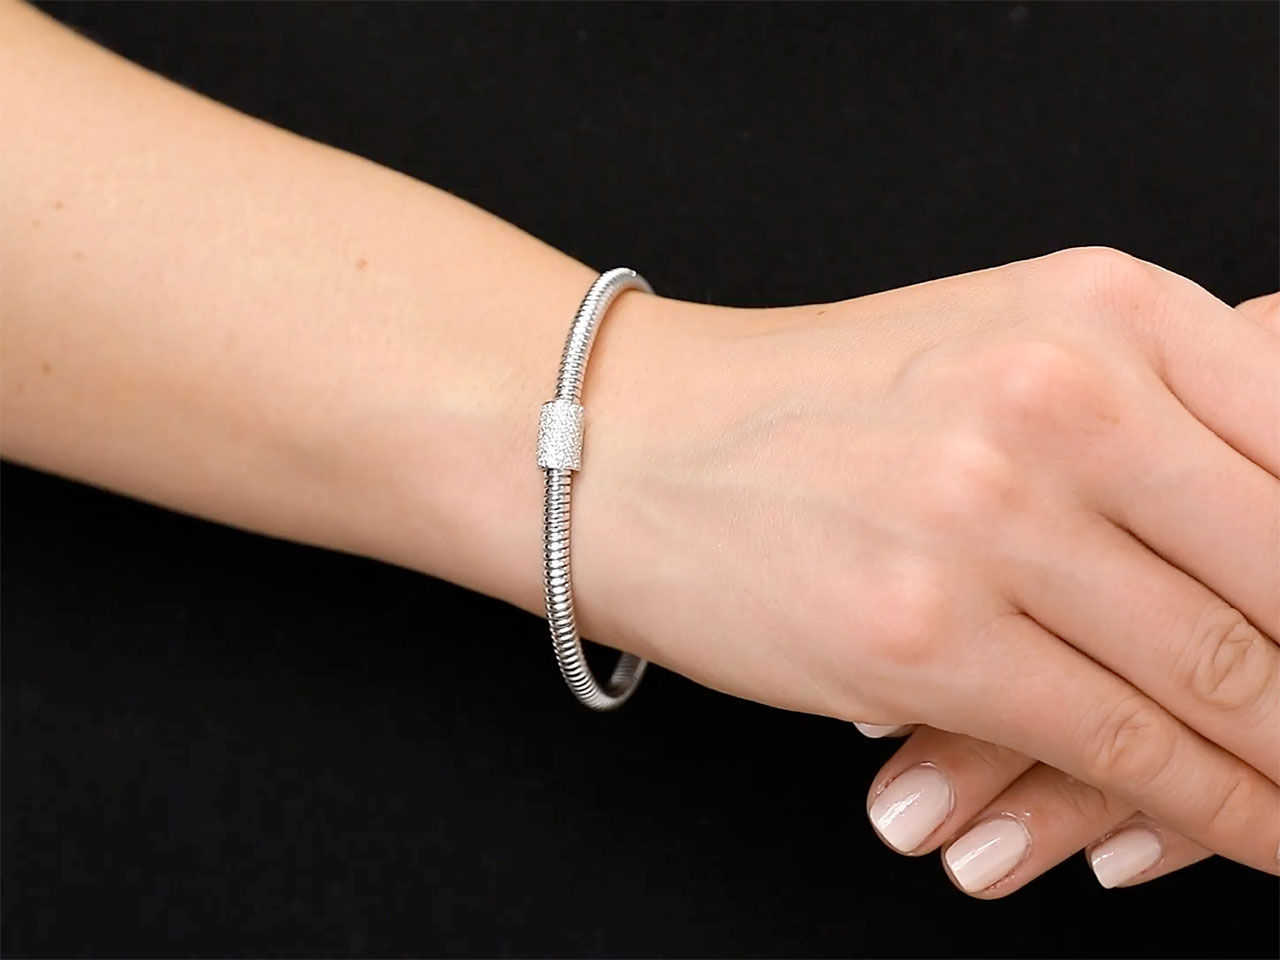 Thin Tubogas Bracelet with Diamond Clasp, in 18K White Gold, by Beladora